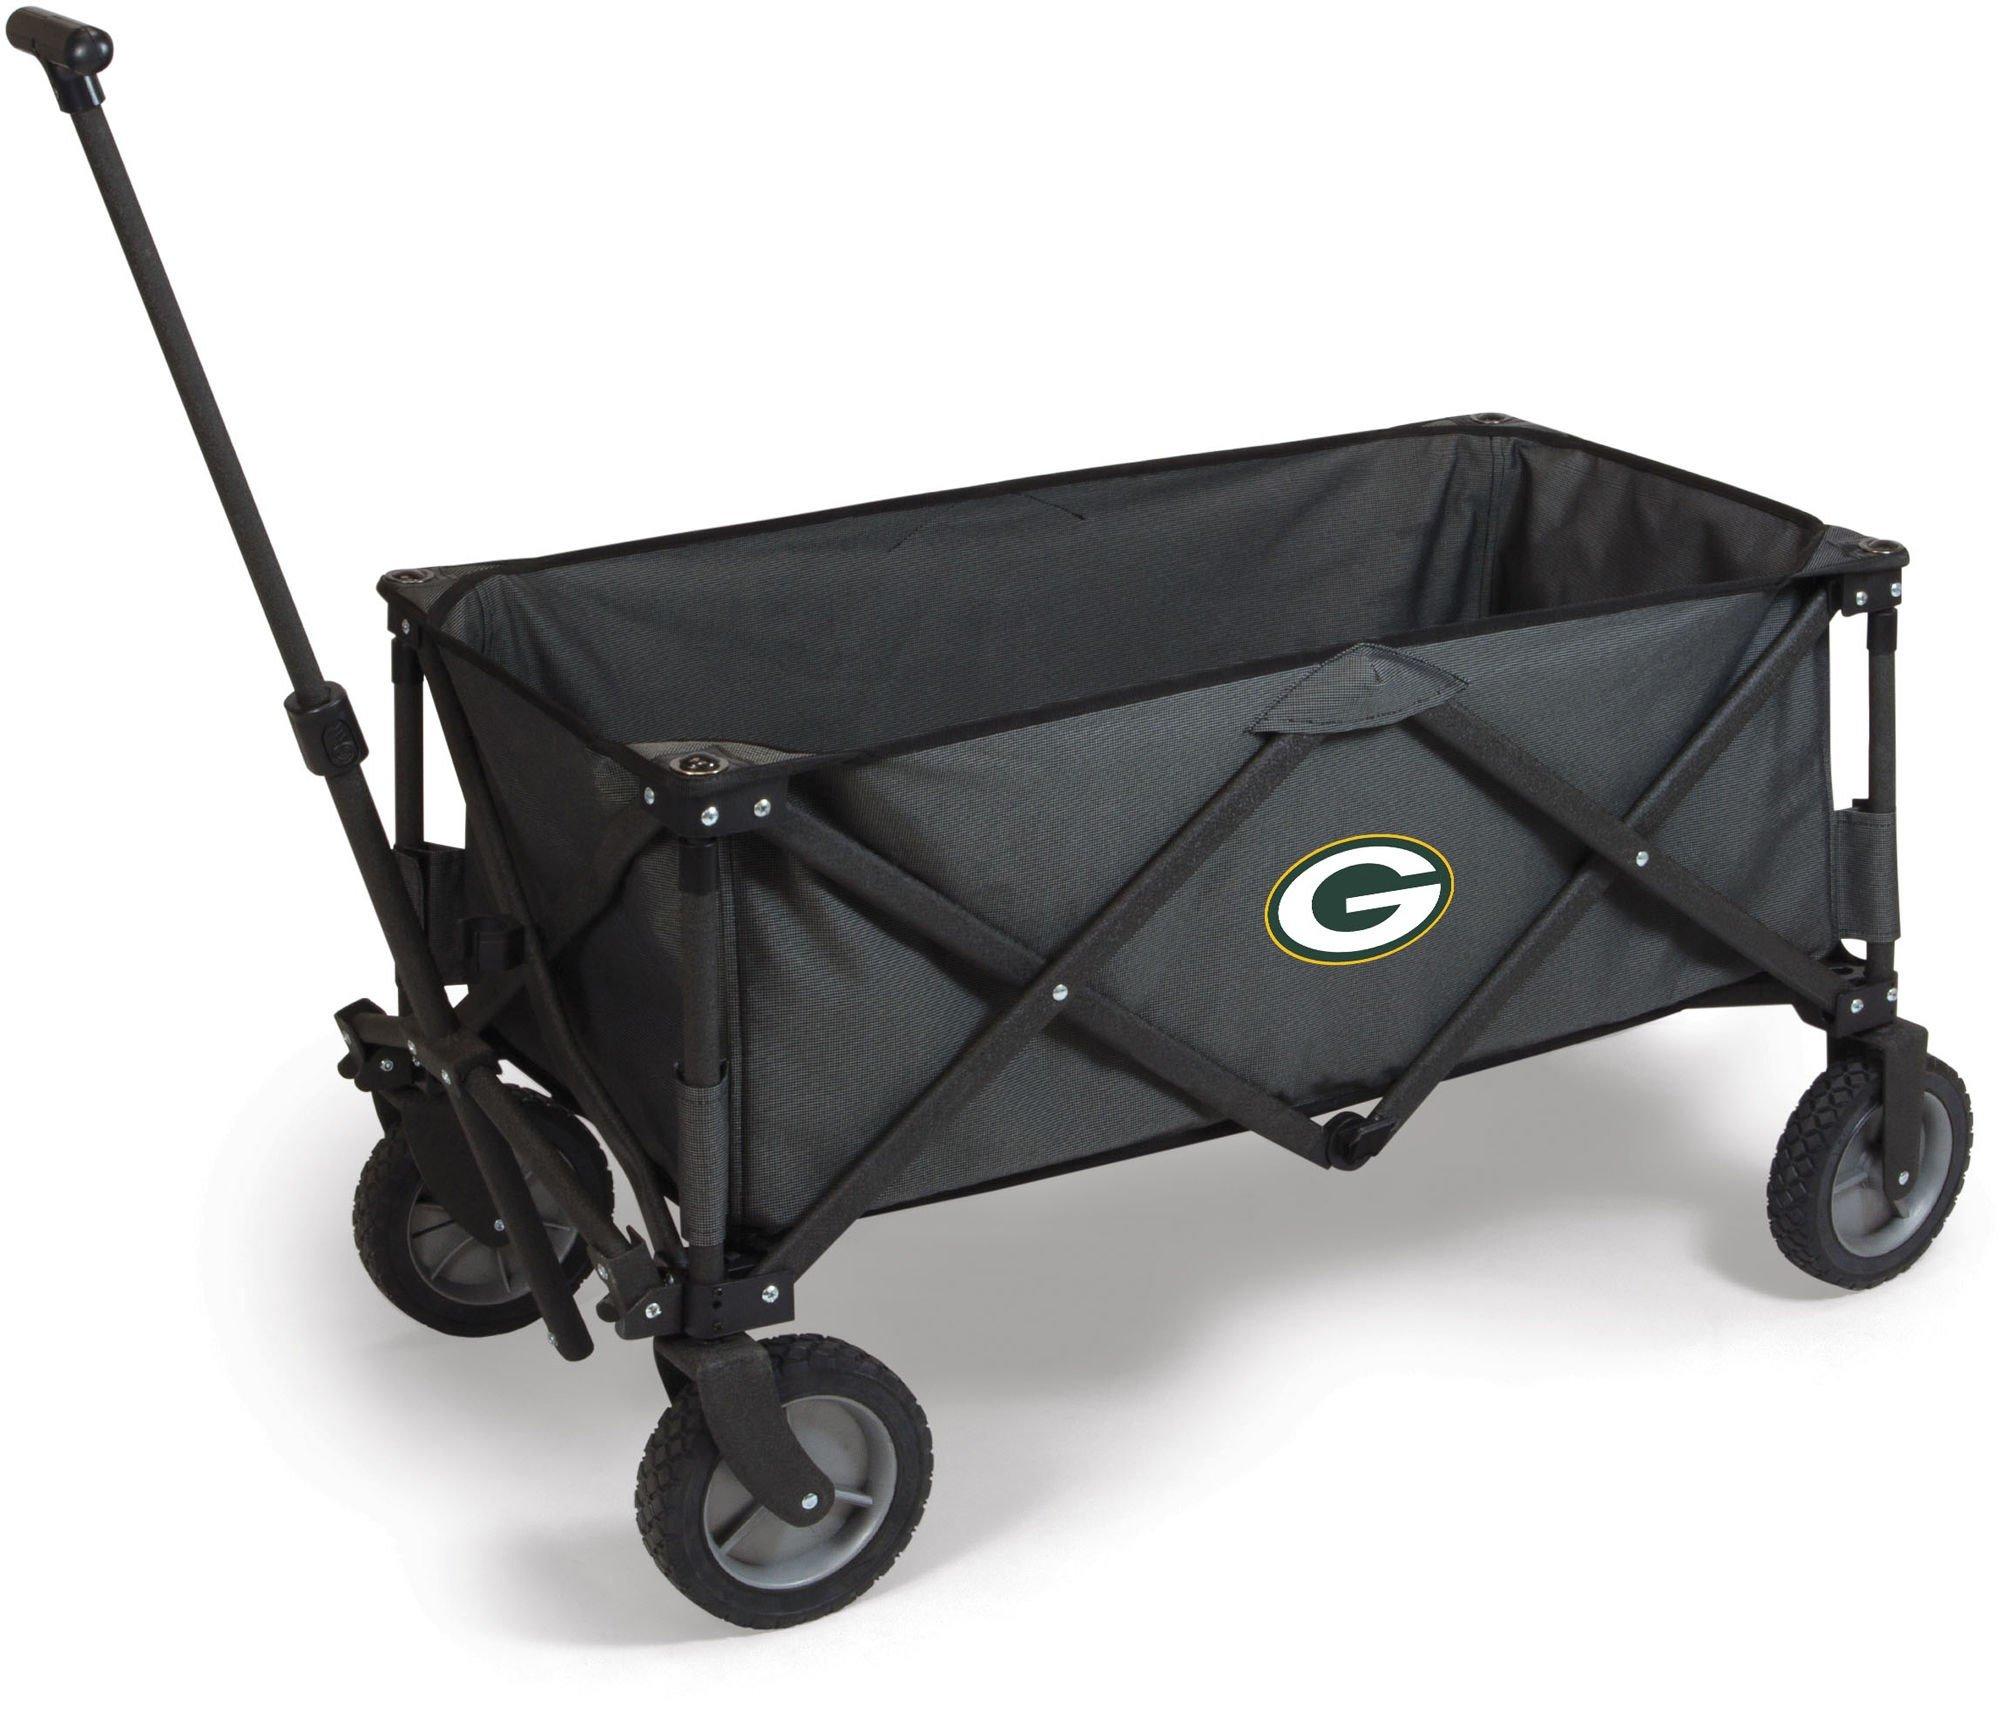 Green Bay Packers Adventure Wagon by Picnic Time